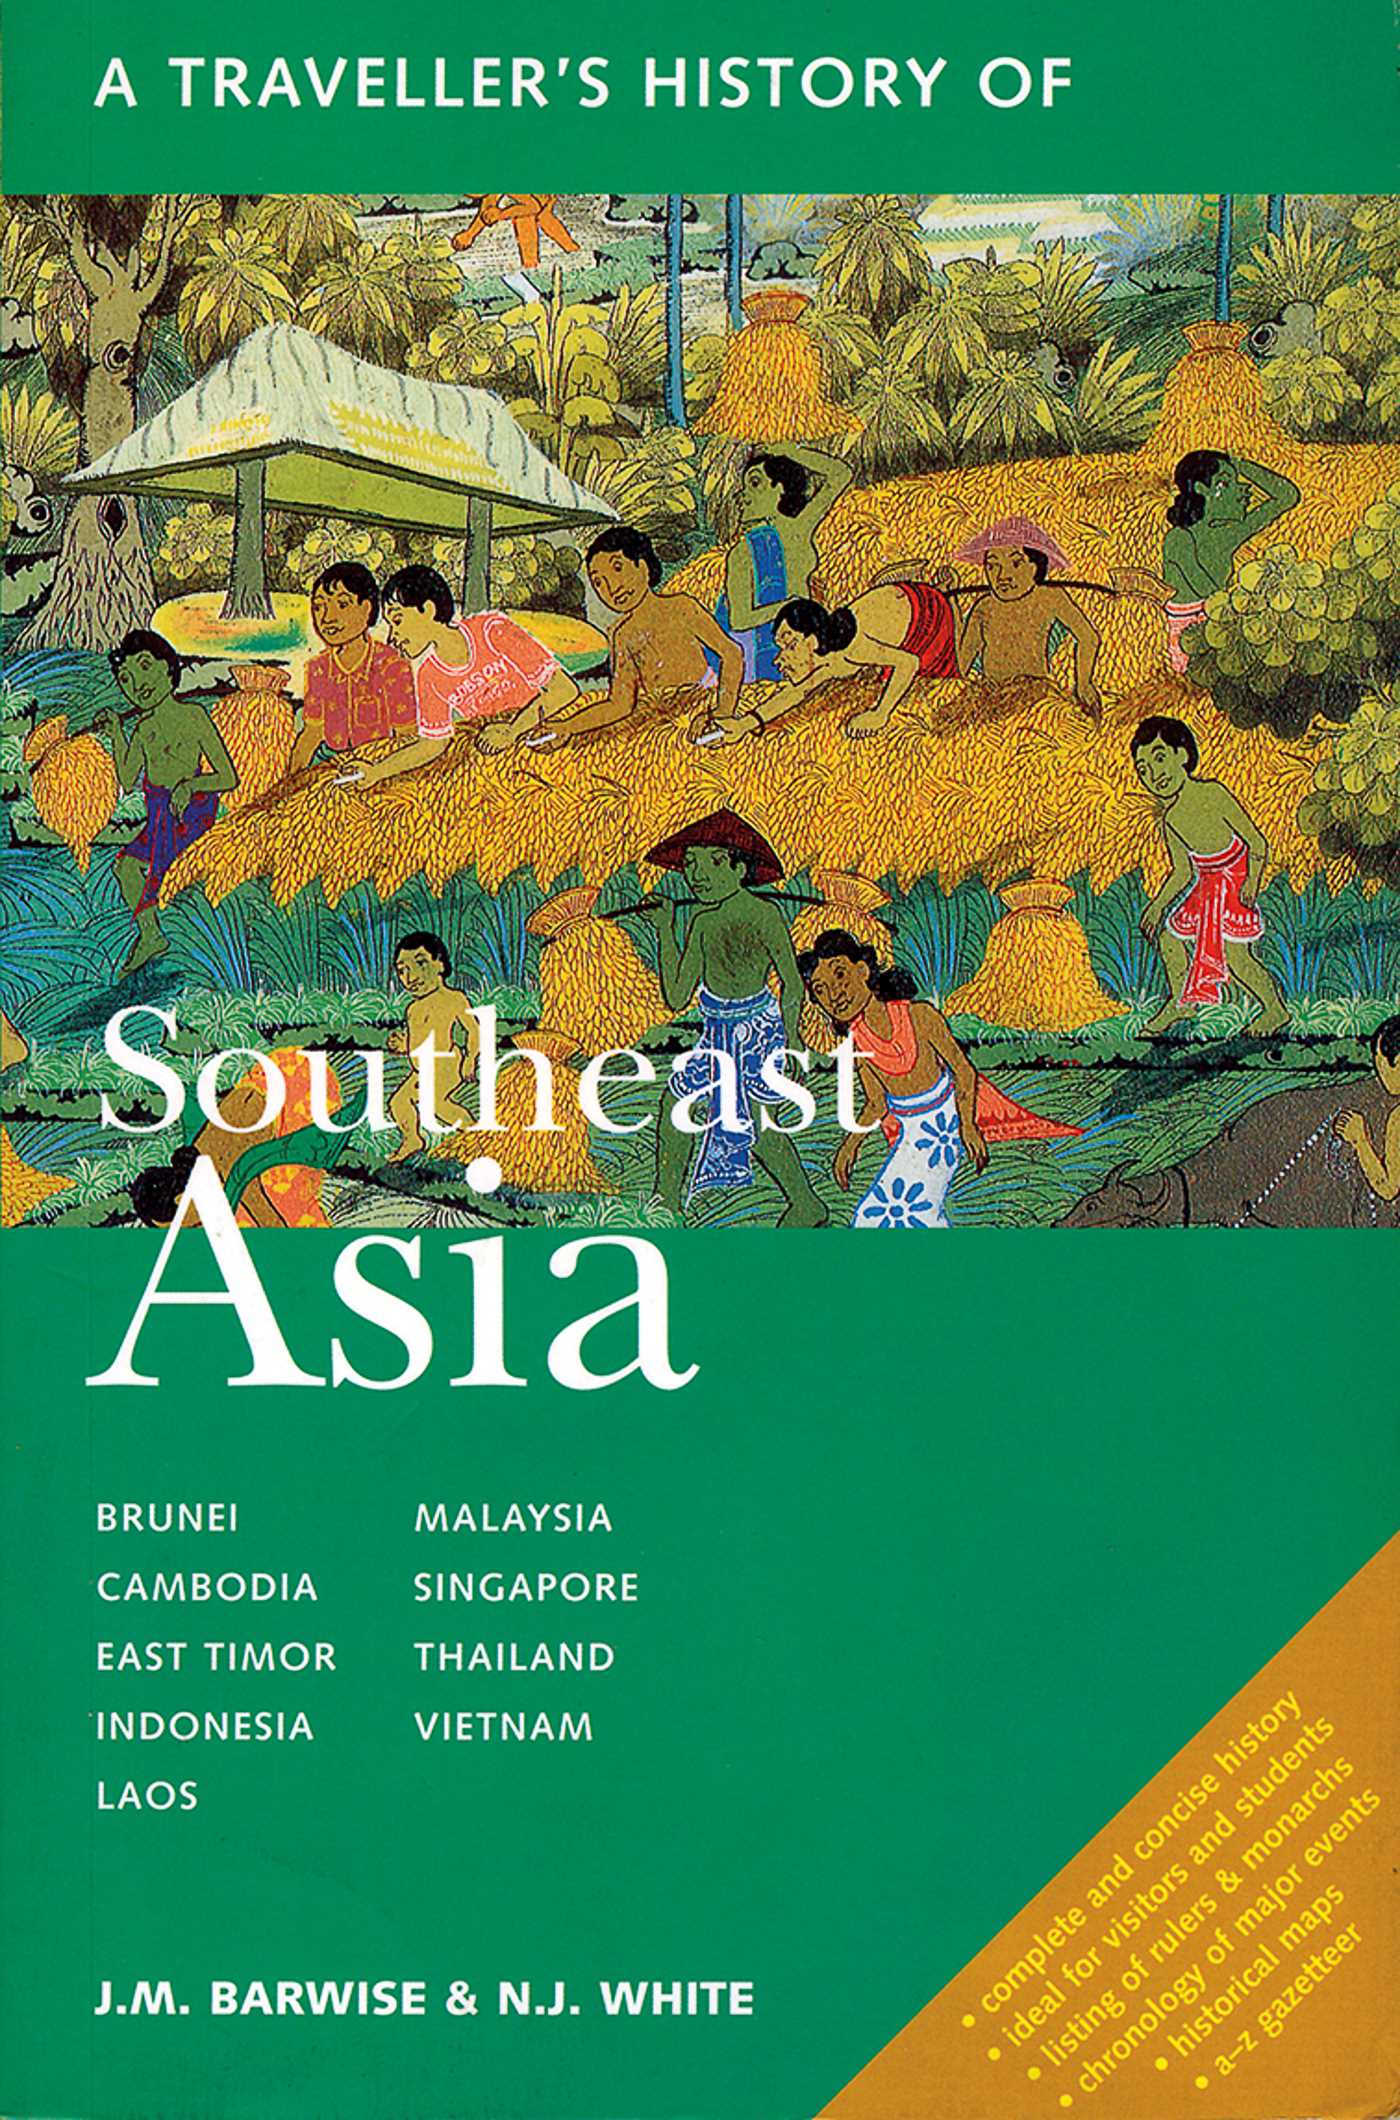 Image for "A Traveller's History of Southeast Asia"